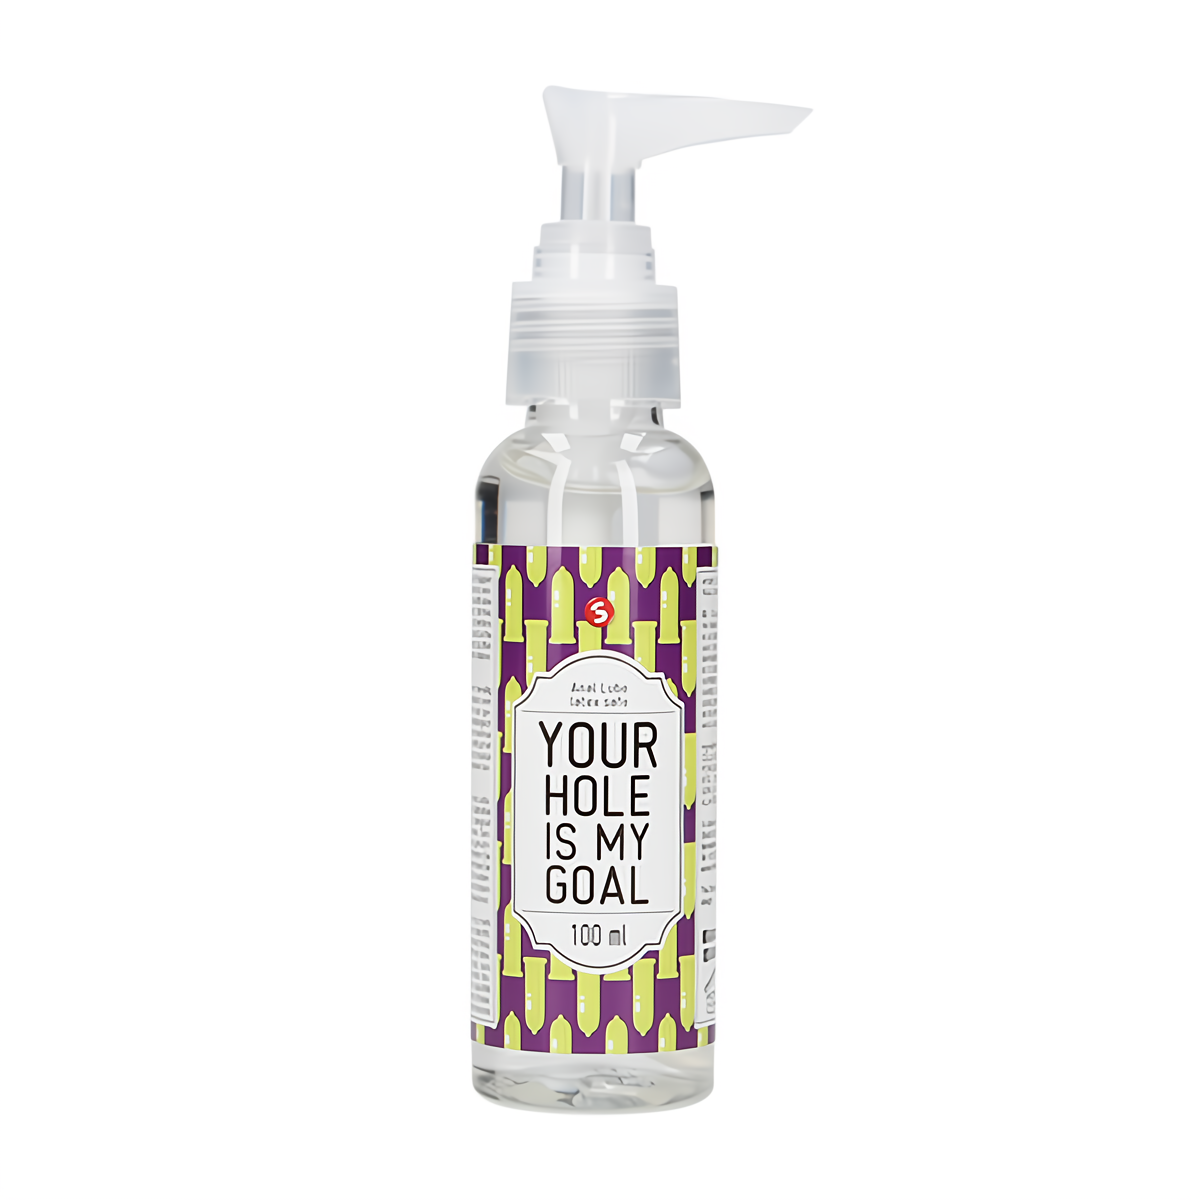 Your Hole Is My Goal - 100 ml